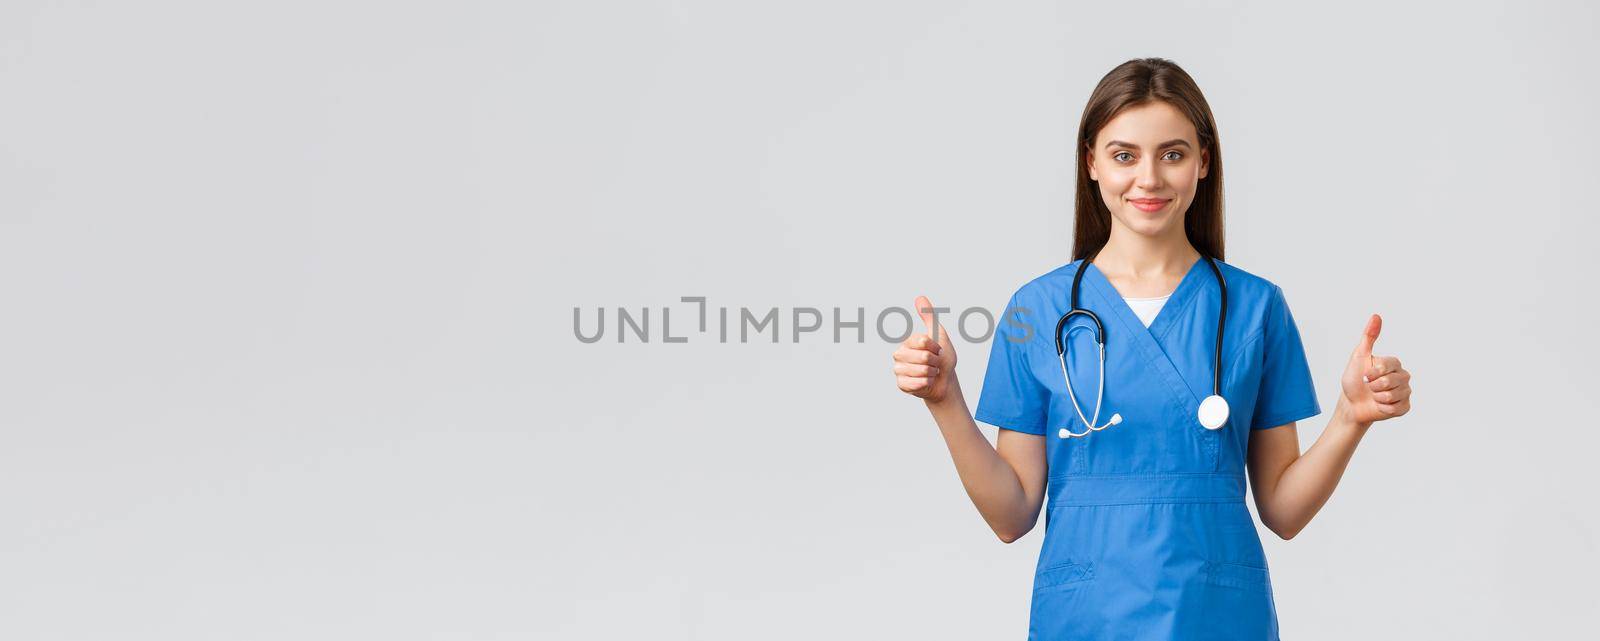 Healthcare workers, prevent virus, insurance and medicine concept. Supportive professional female nurse or doctor in blue scrubs, stethoscope, show thumbs-up in approval, smiling.